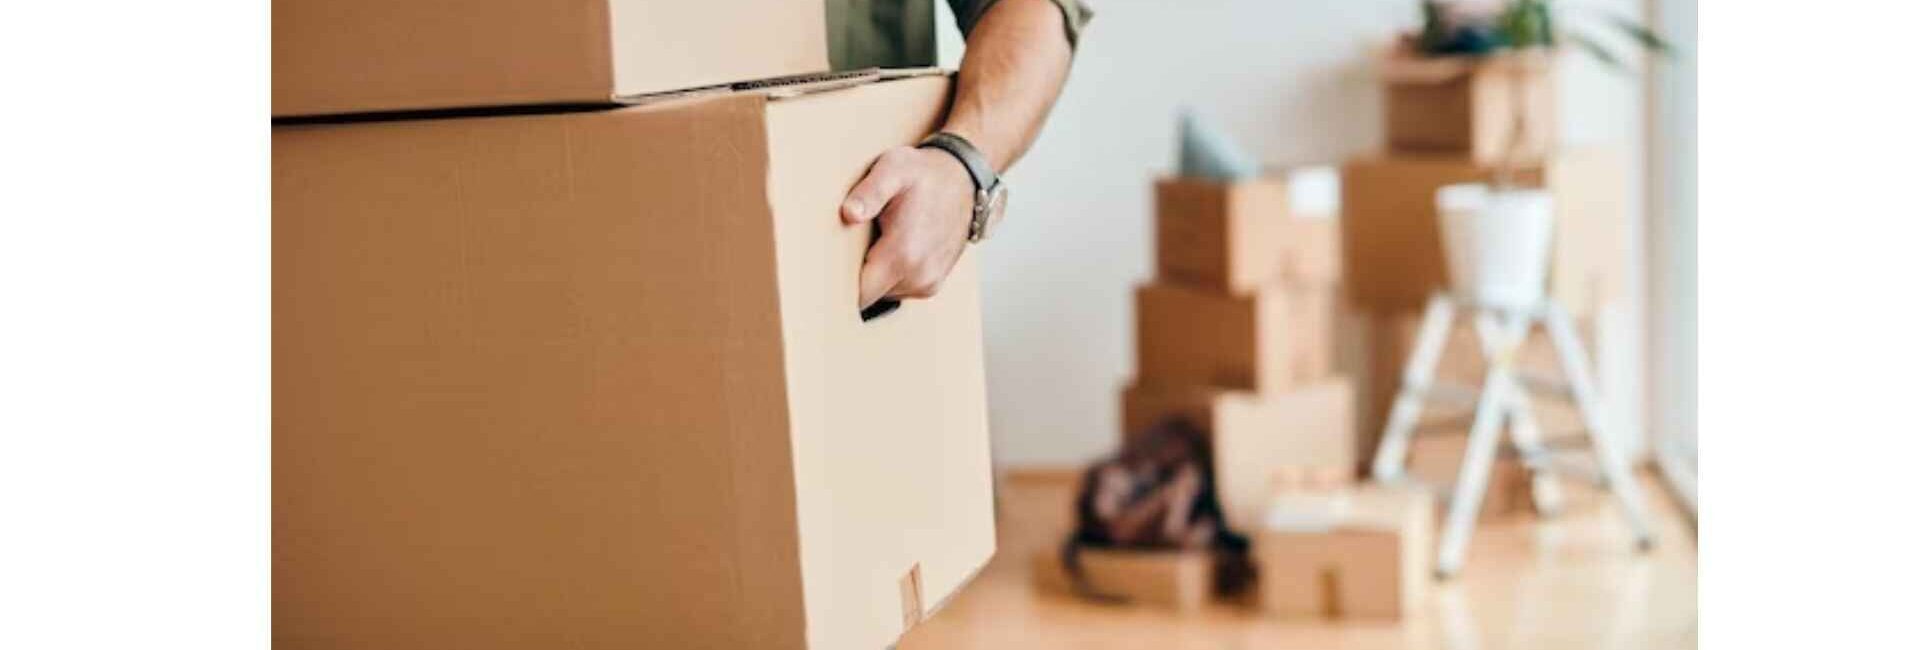 BS Noida Packers and Movers - Packers and Movers Service in Noida